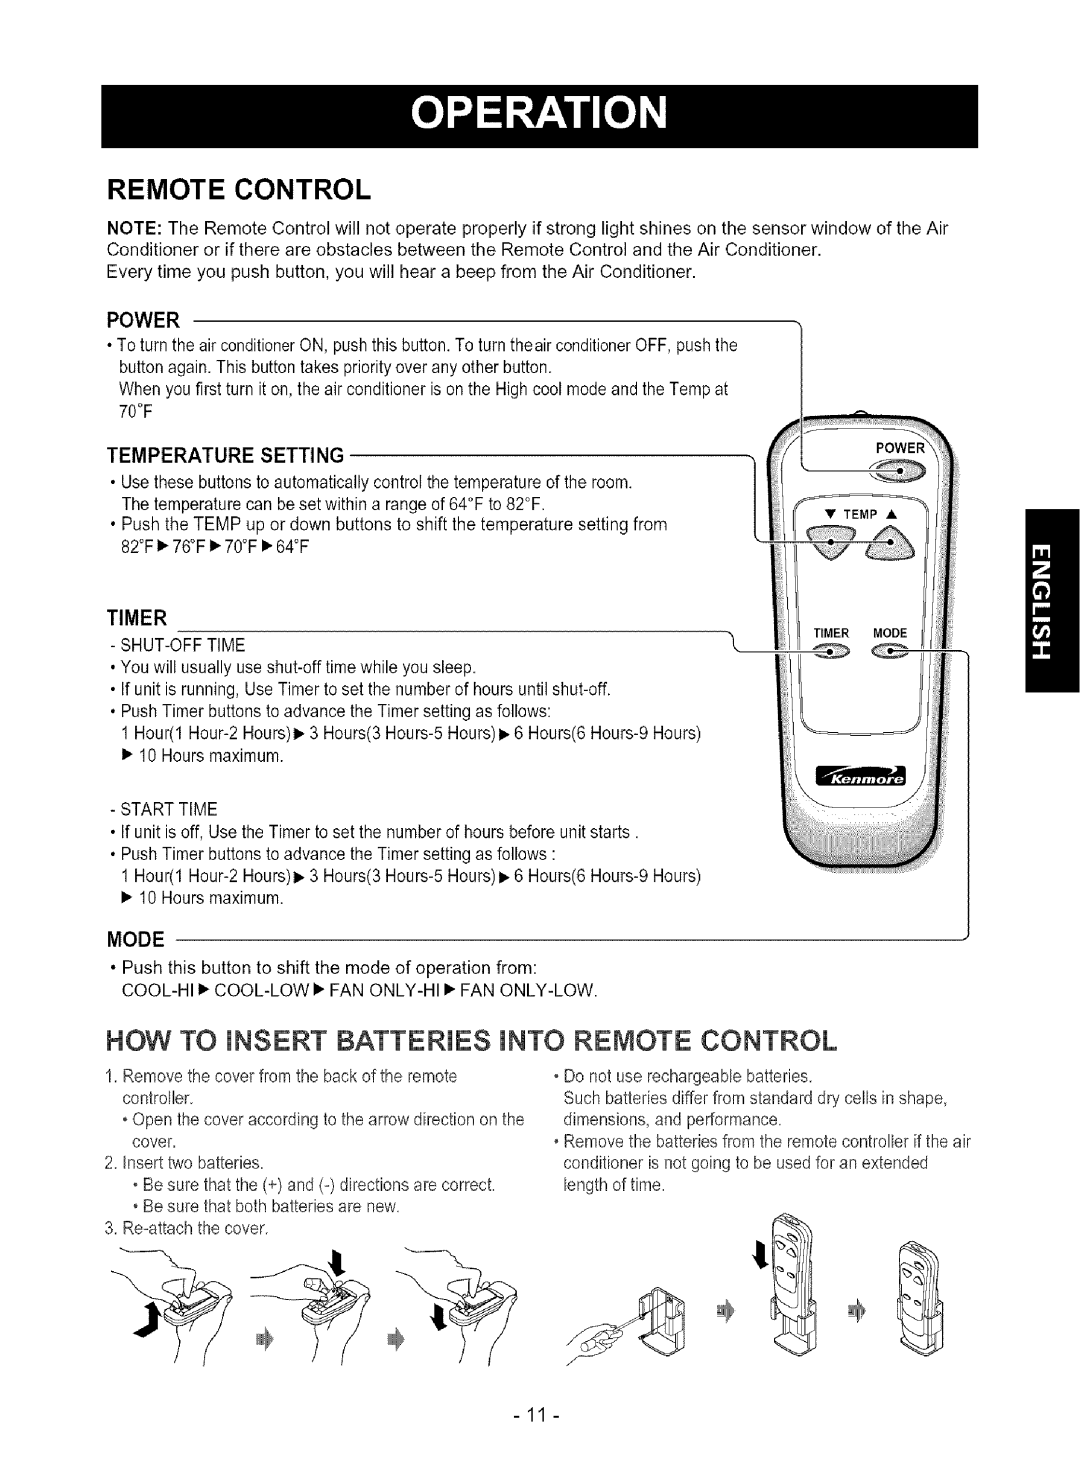 Kenmore 580.75080 Remote Control, HOW TO iNSERT BATTERIES iNTO REMOTE CONTROL, Power, Temperature Setting, Timer, Mode 